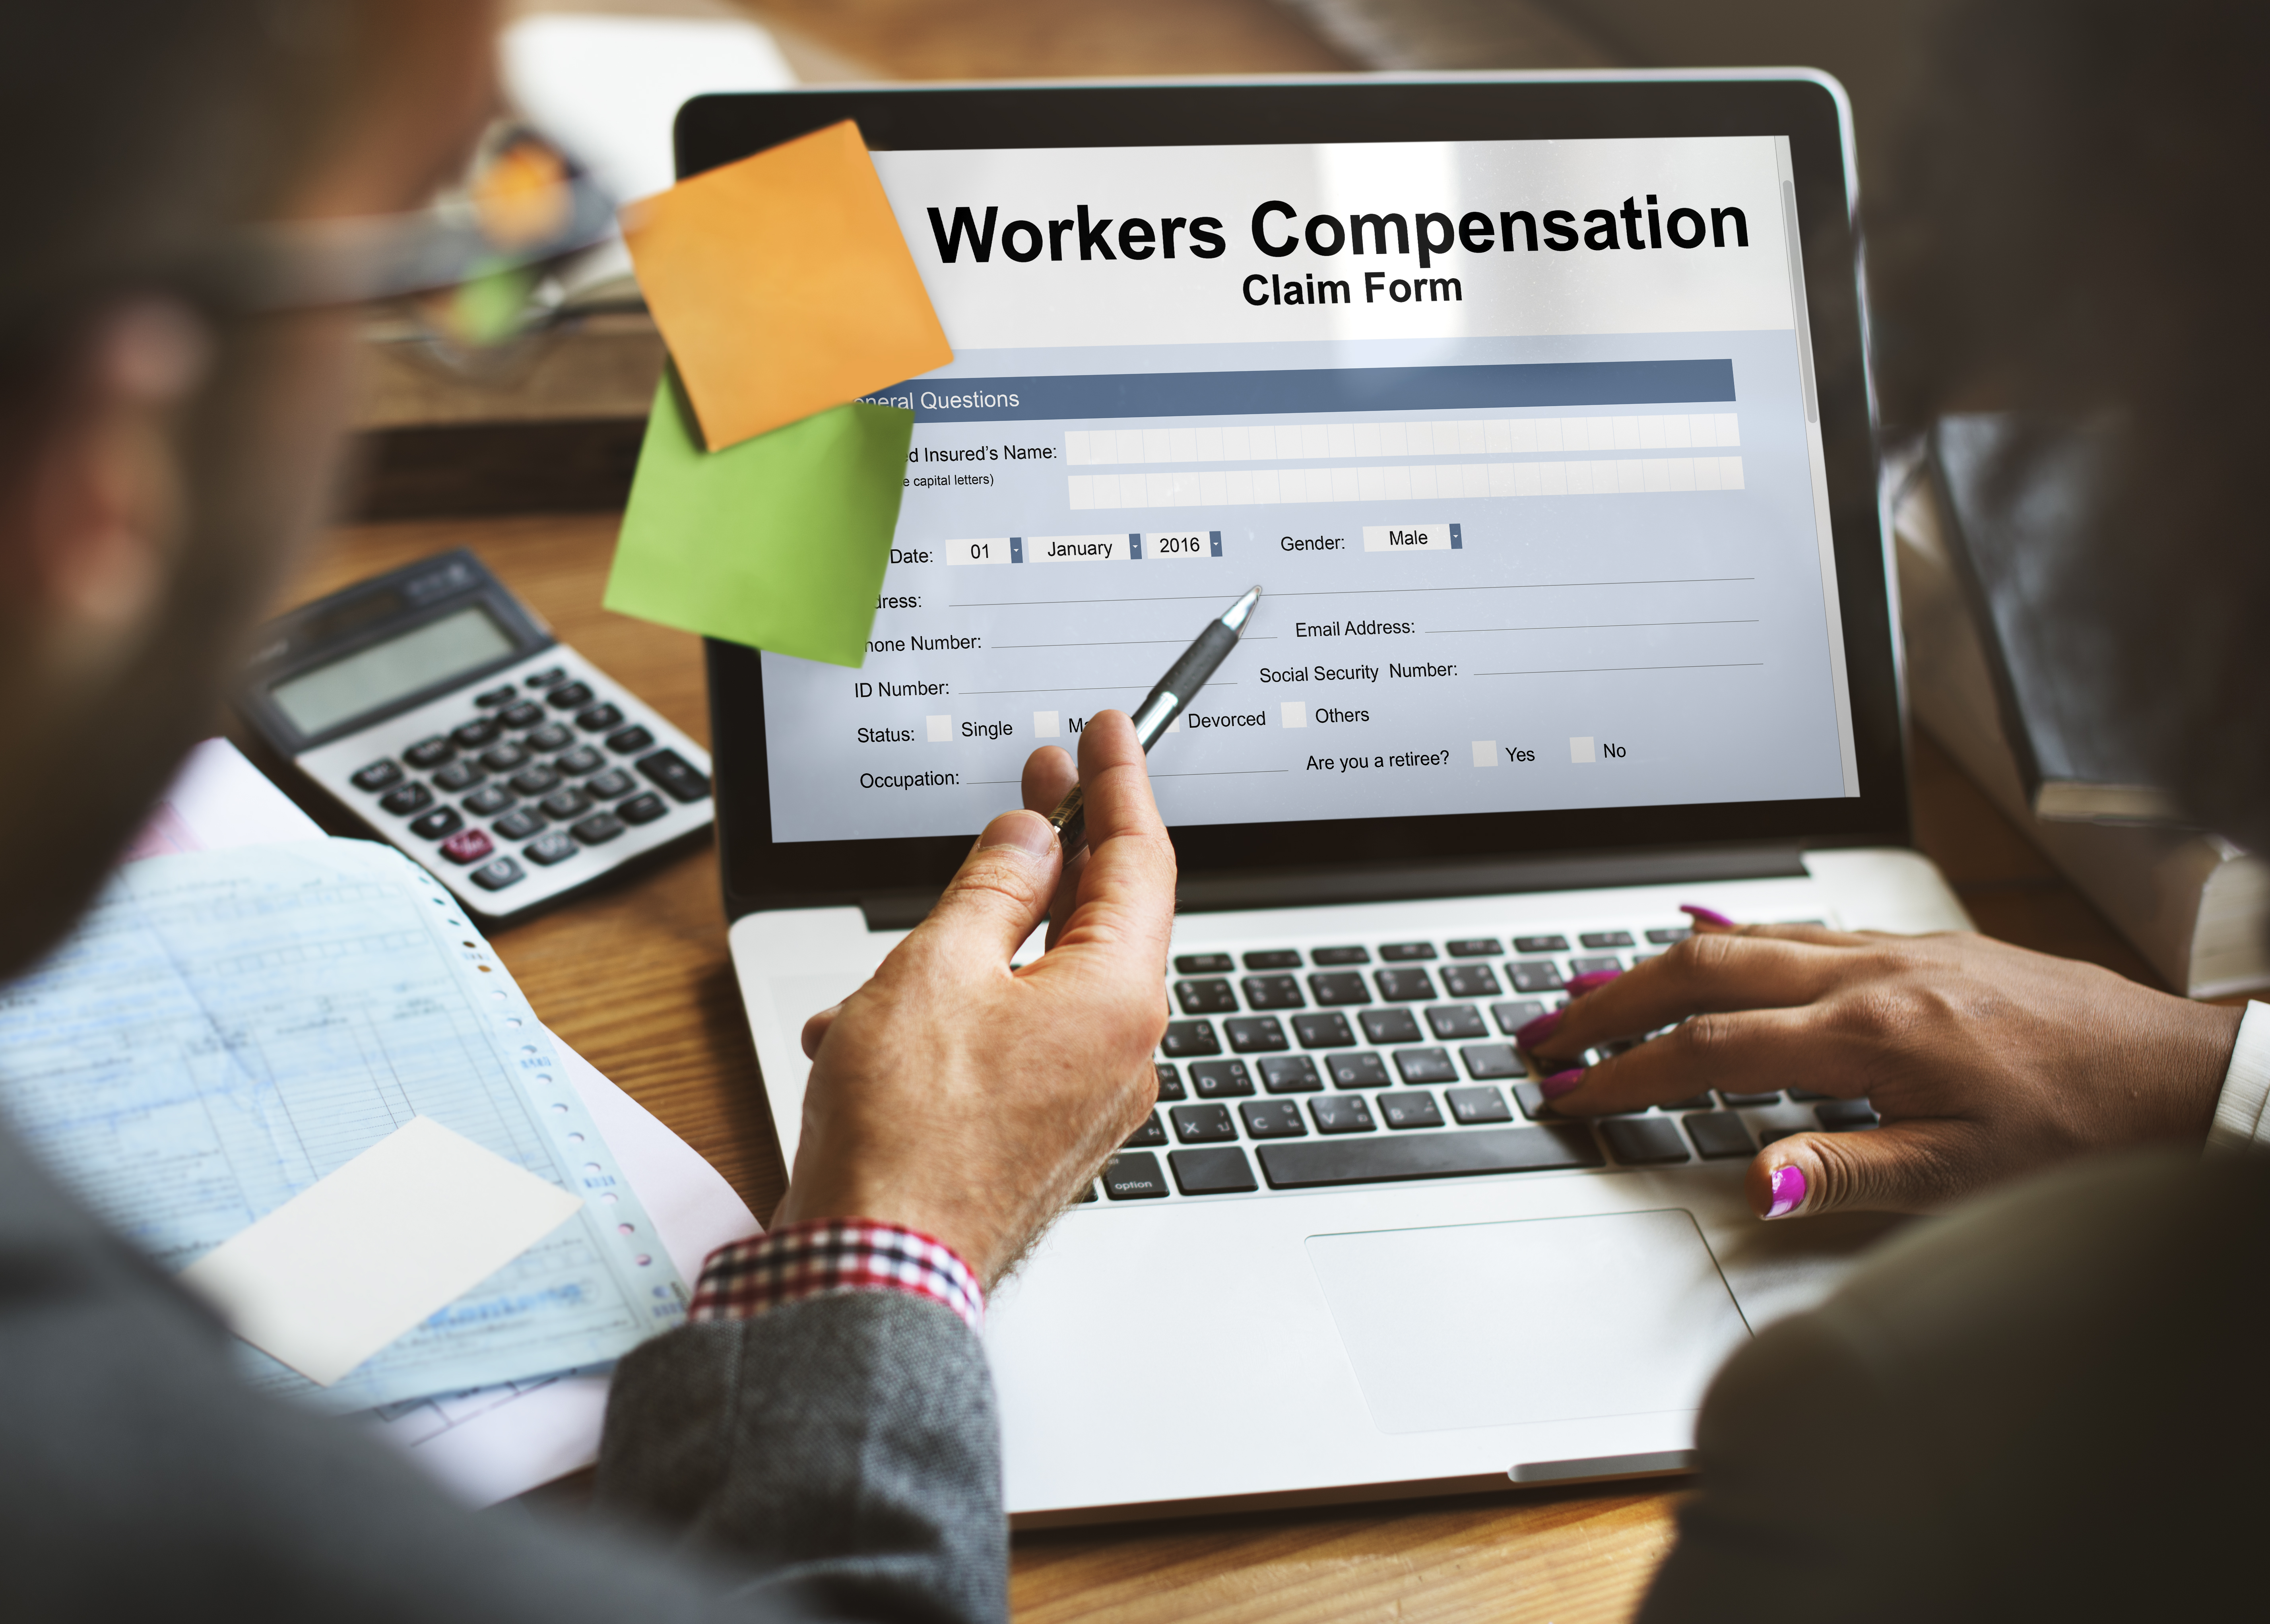 New Signs of a Changing Market for Workers’ Compensation